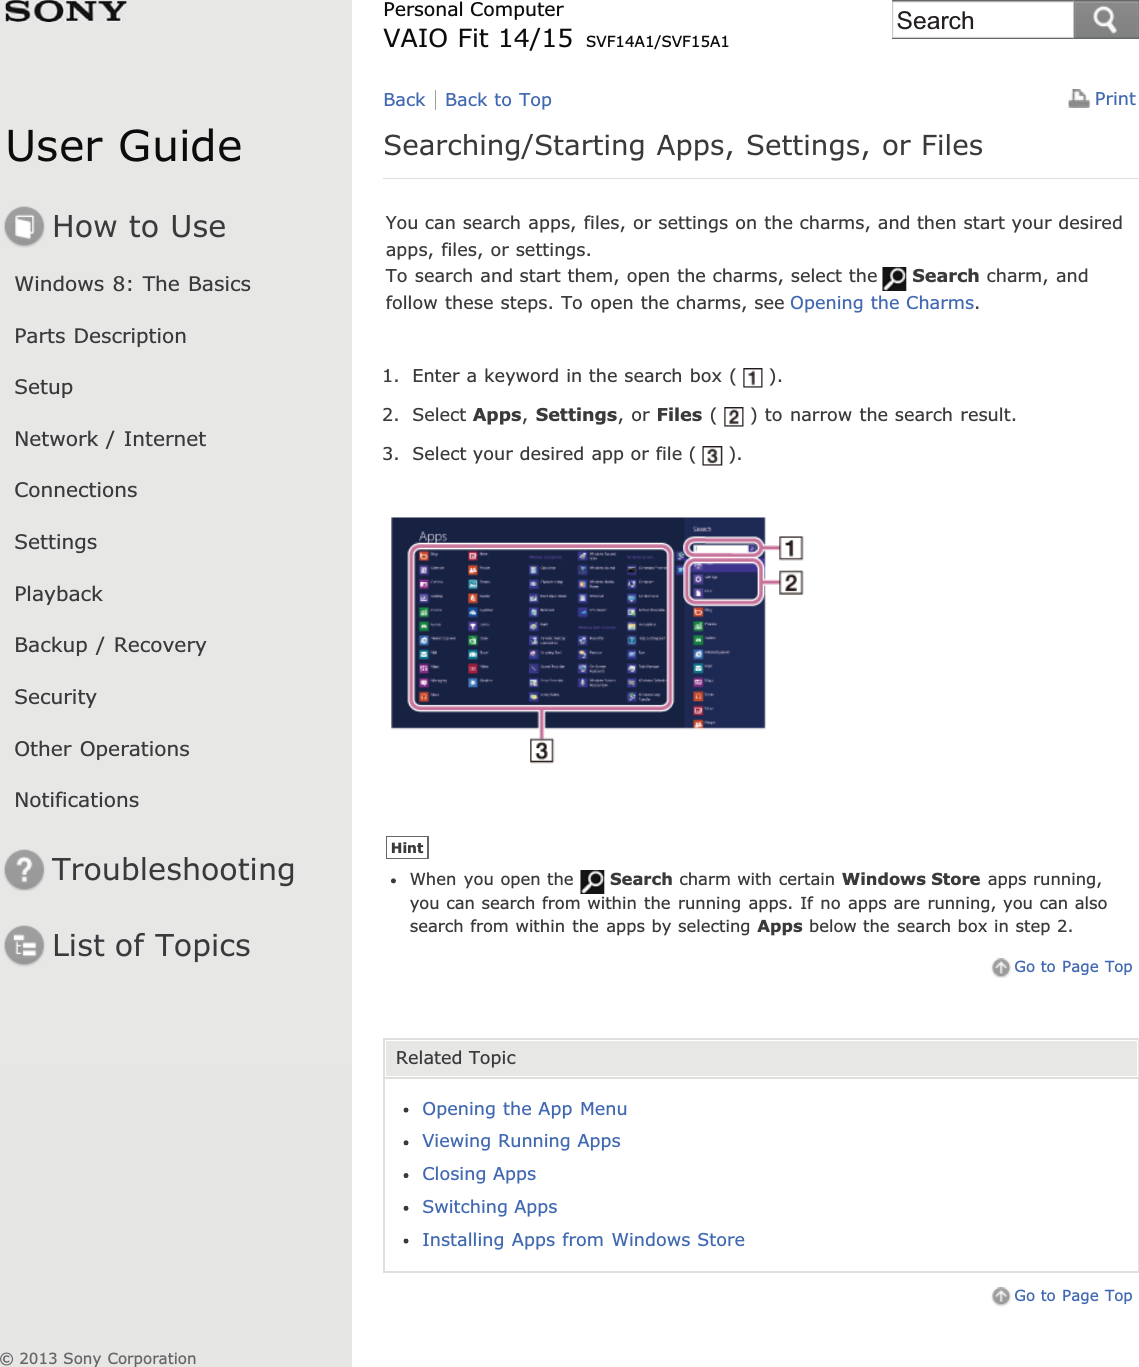 User GuideHow to UseWindows 8: The BasicsParts DescriptionSetupNetwork / InternetConnectionsSettingsPlaybackBackup / RecoverySecurityOther OperationsNotificationsTroubleshootingList of TopicsPrintPersonal ComputerVAIO Fit 14/15 SVF14A1/SVF15A1Searching/Starting Apps, Settings, or FilesYou can search apps, files, or settings on the charms, and then start your desiredapps, files, or settings.To search and start them, open the charms, select the Search charm, andfollow these steps. To open the charms, see Opening the Charms.1. Enter a keyword in the search box ( ).2. Select Apps,Settings, or Files ( ) to narrow the search result.3. Select your desired app or file ( ).HintWhen you open the Search charm with certain Windows Store apps running,you can search from within the running apps. If no apps are running, you can alsosearch from within the apps by selecting Apps below the search box in step 2.Go to Page TopRelated TopicOpening the App MenuViewing Running AppsClosing AppsSwitching AppsInstalling Apps from Windows StoreGo to Page TopBack Back to Top© 2013 Sony CorporationSearch